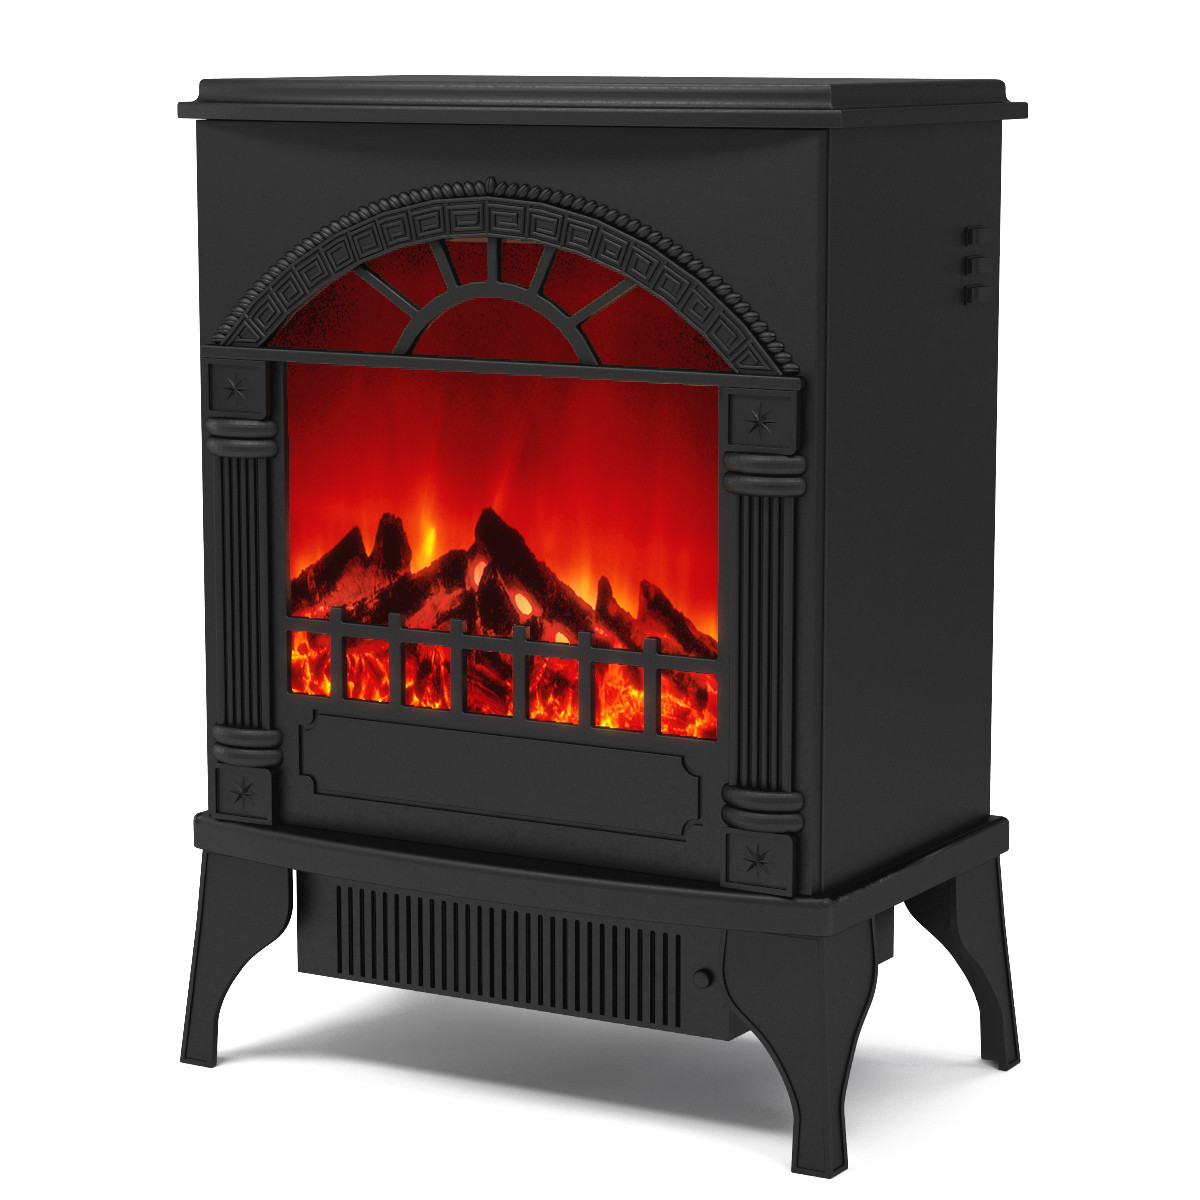 Electric Space Heaters Fireplace
 Apollo Electric Fireplace Free Standing Portable Space